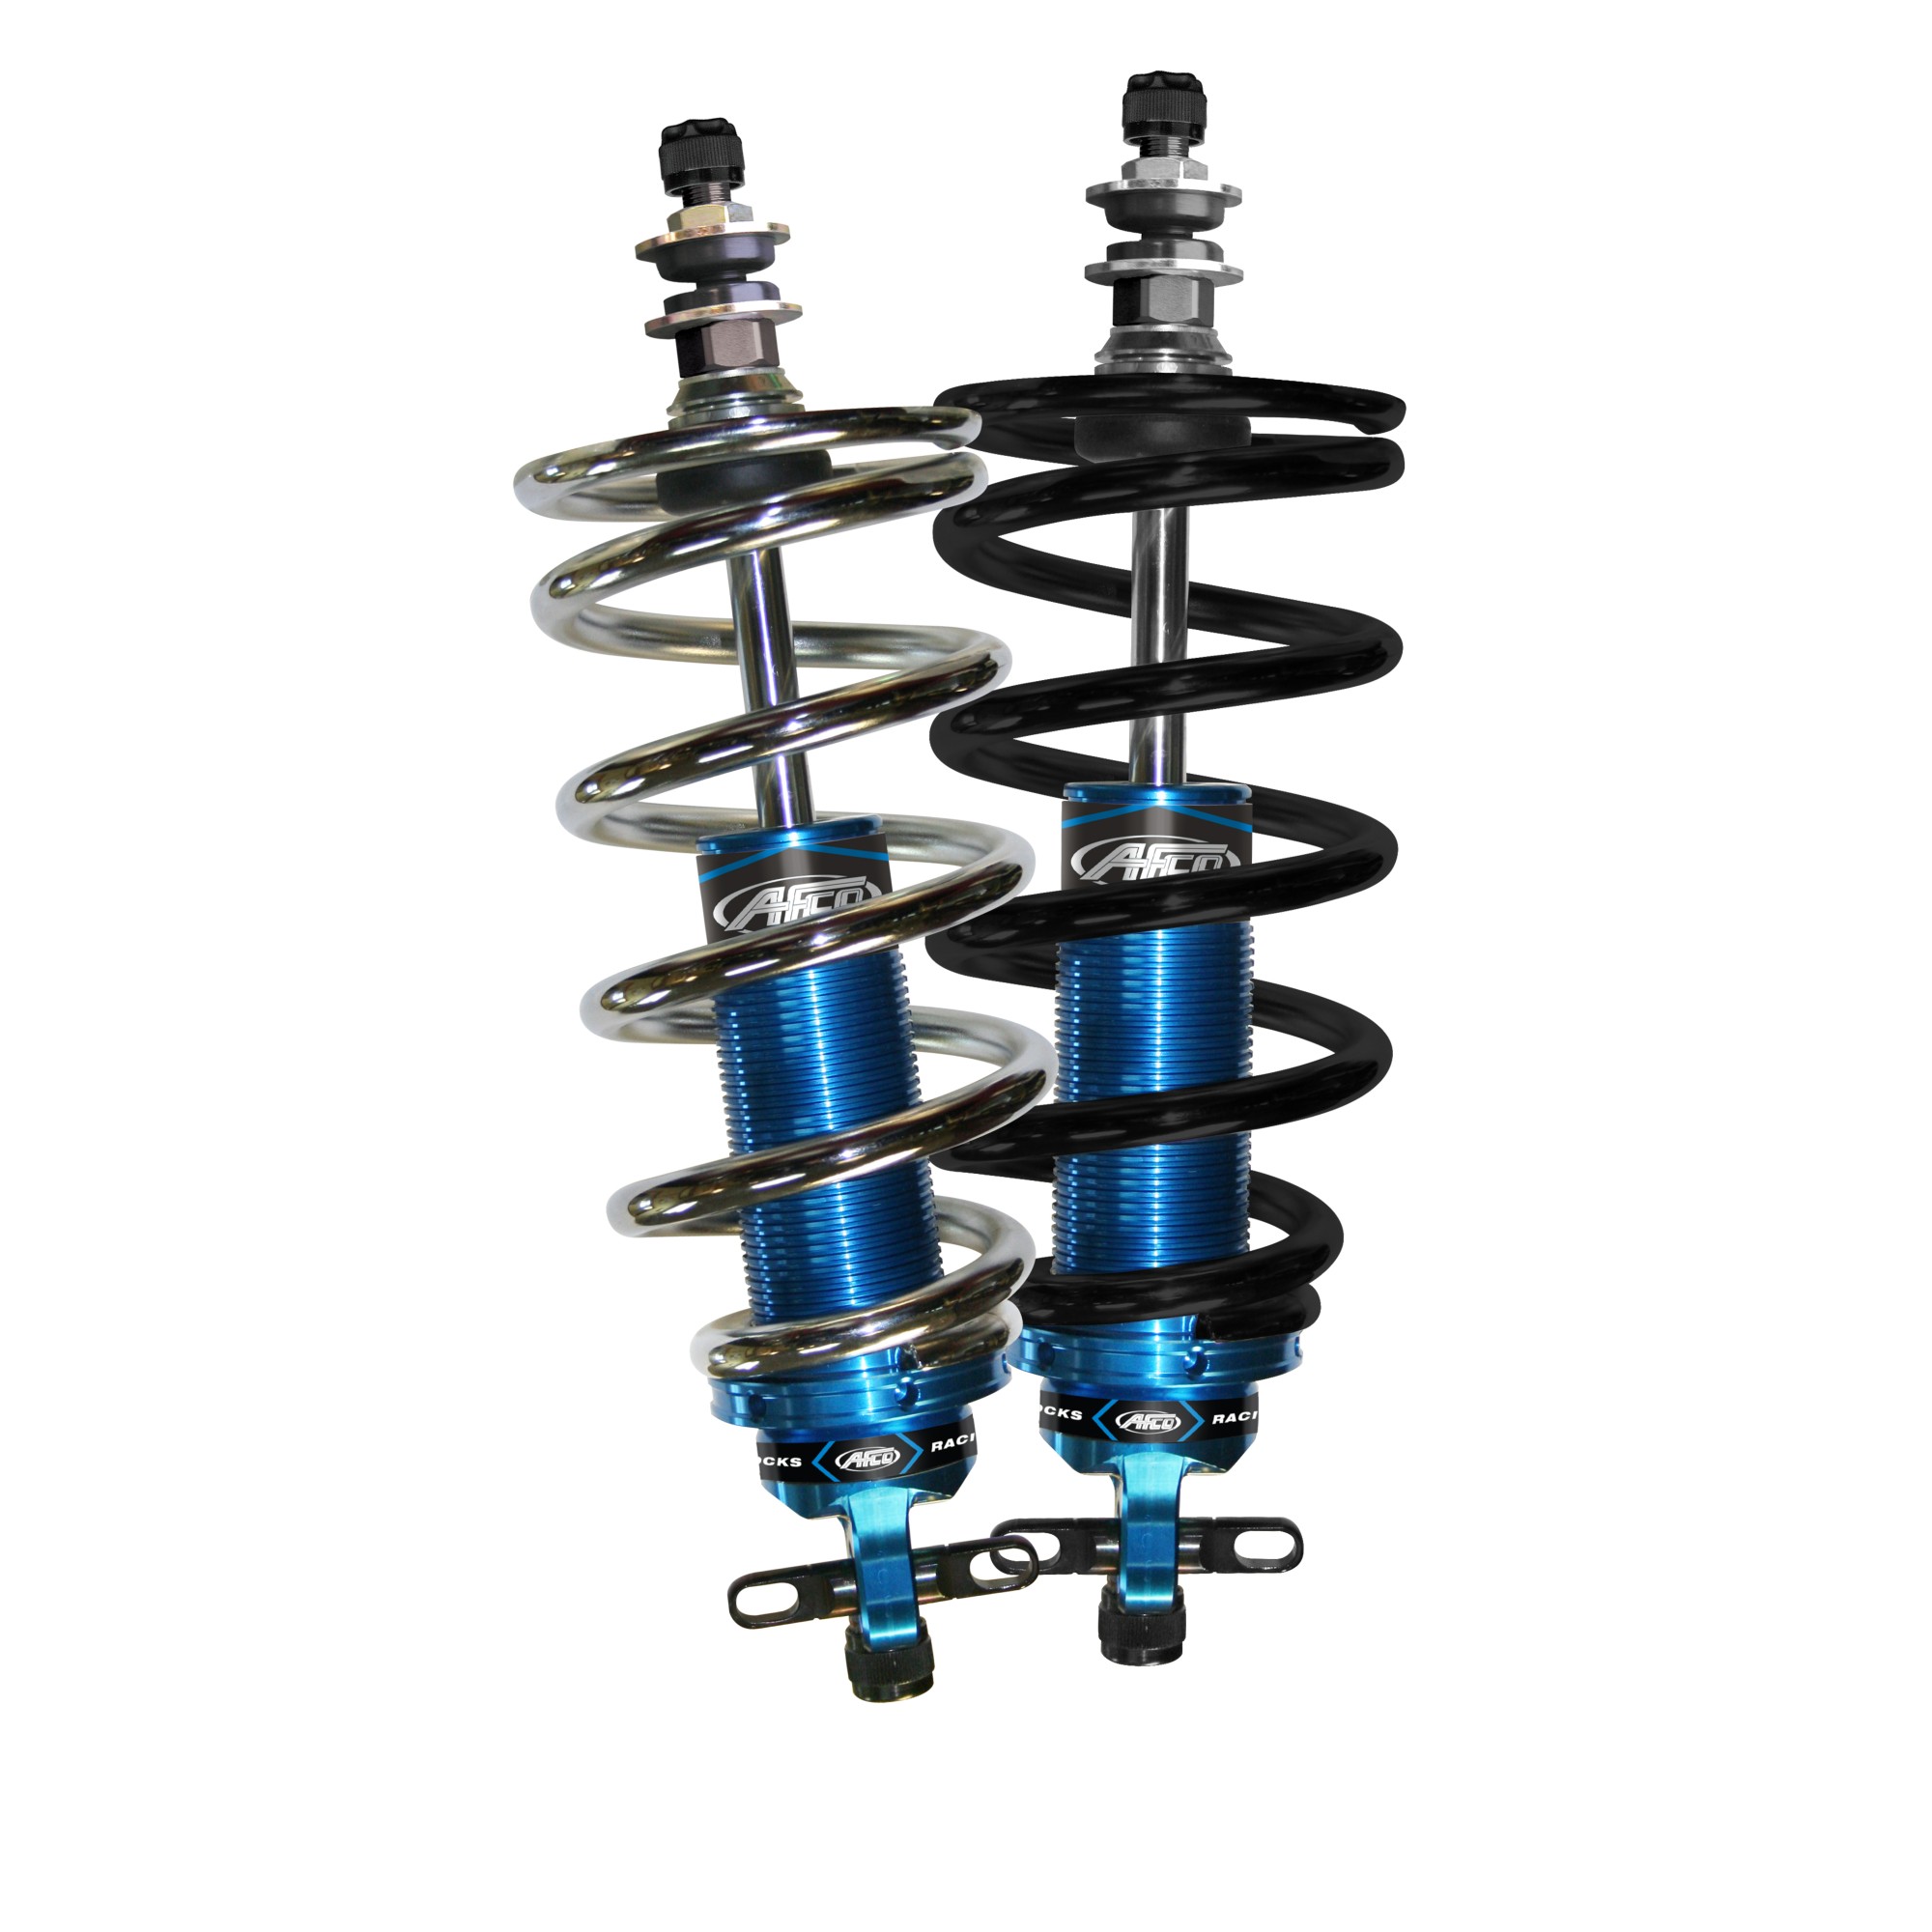 GM Single Adjustable Front Coil-over Conversion Kit Fits 68-83 Chevelle/Monte Carlo/Malibu With Big Block Engine.